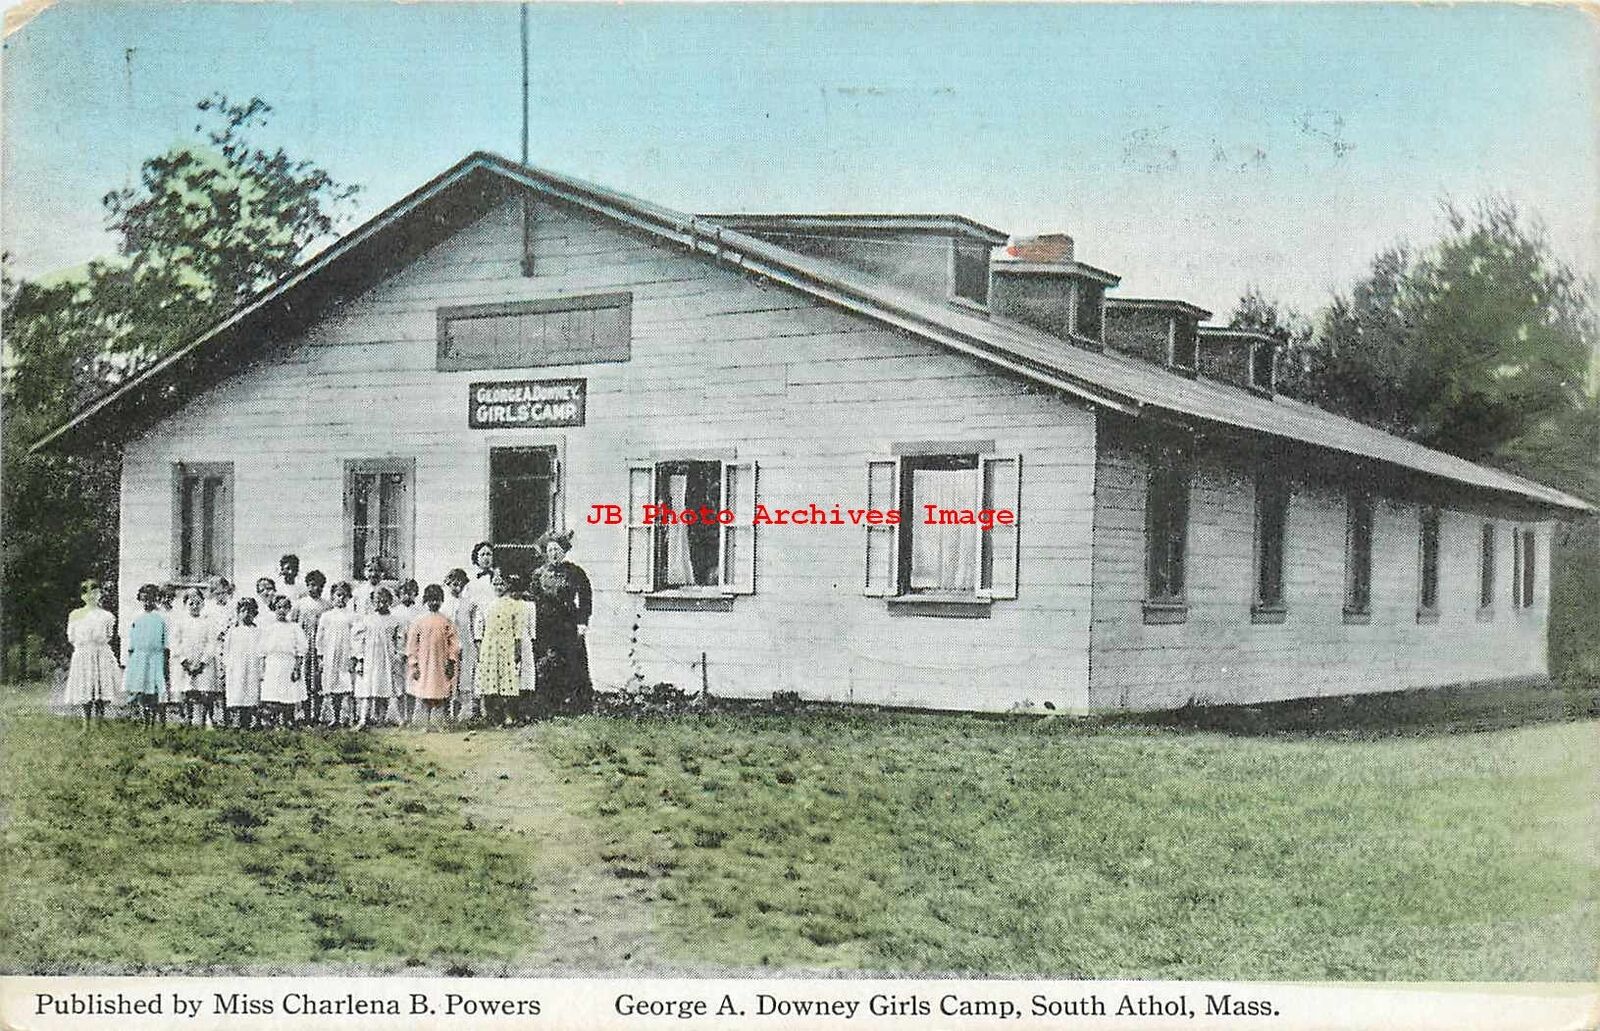 MA, South Athol, Massachusetts, George Downey Girls Camp, Swallow Post Card